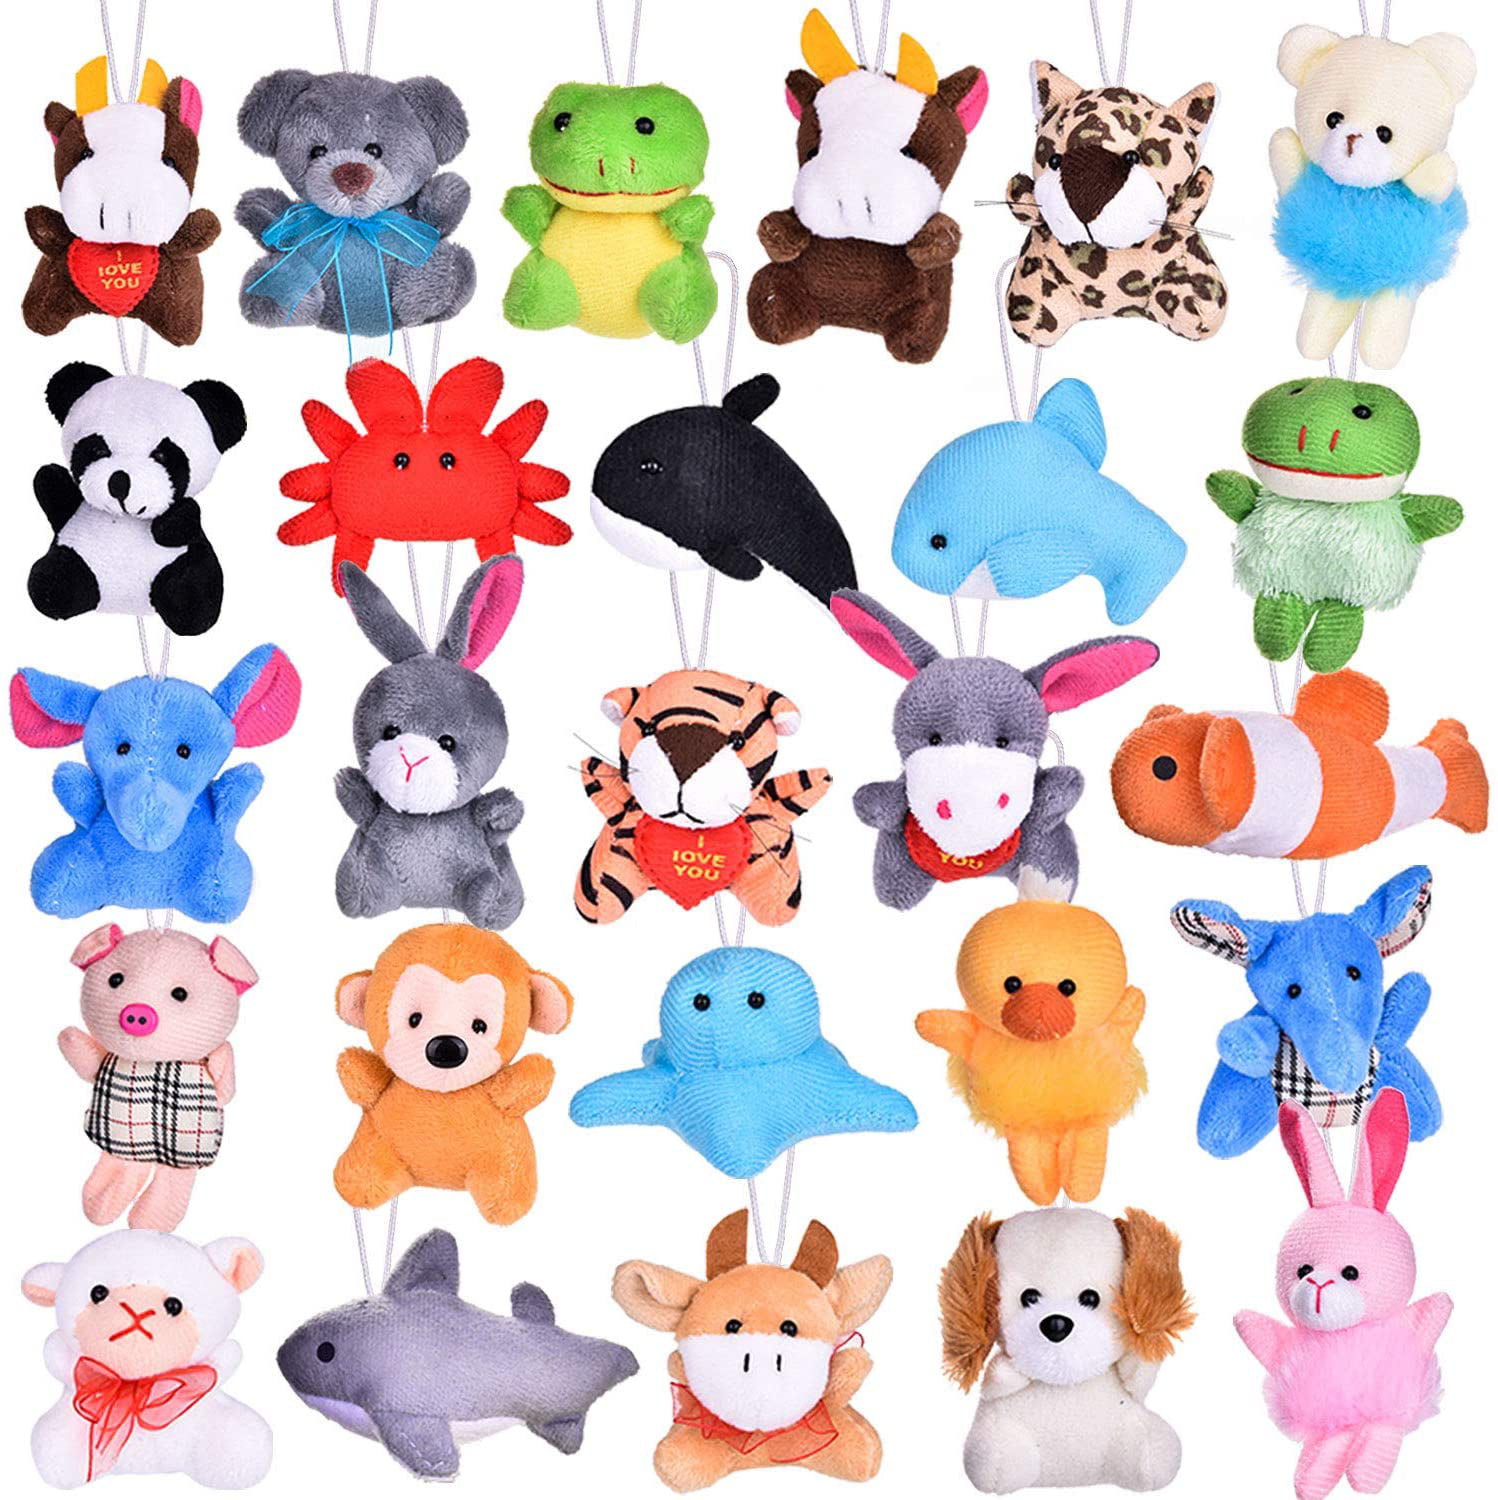 AMUTOY 24 Pack Mini Animal Plush Toy Assortment,Assorted Style Small Stuffed Animal Bulk for Kids Toddlers,Carnival/Classroom Prizes,Stocking Stuffers,Goody Bag Filler,Pinata Stuffer,Kids Party Favors 